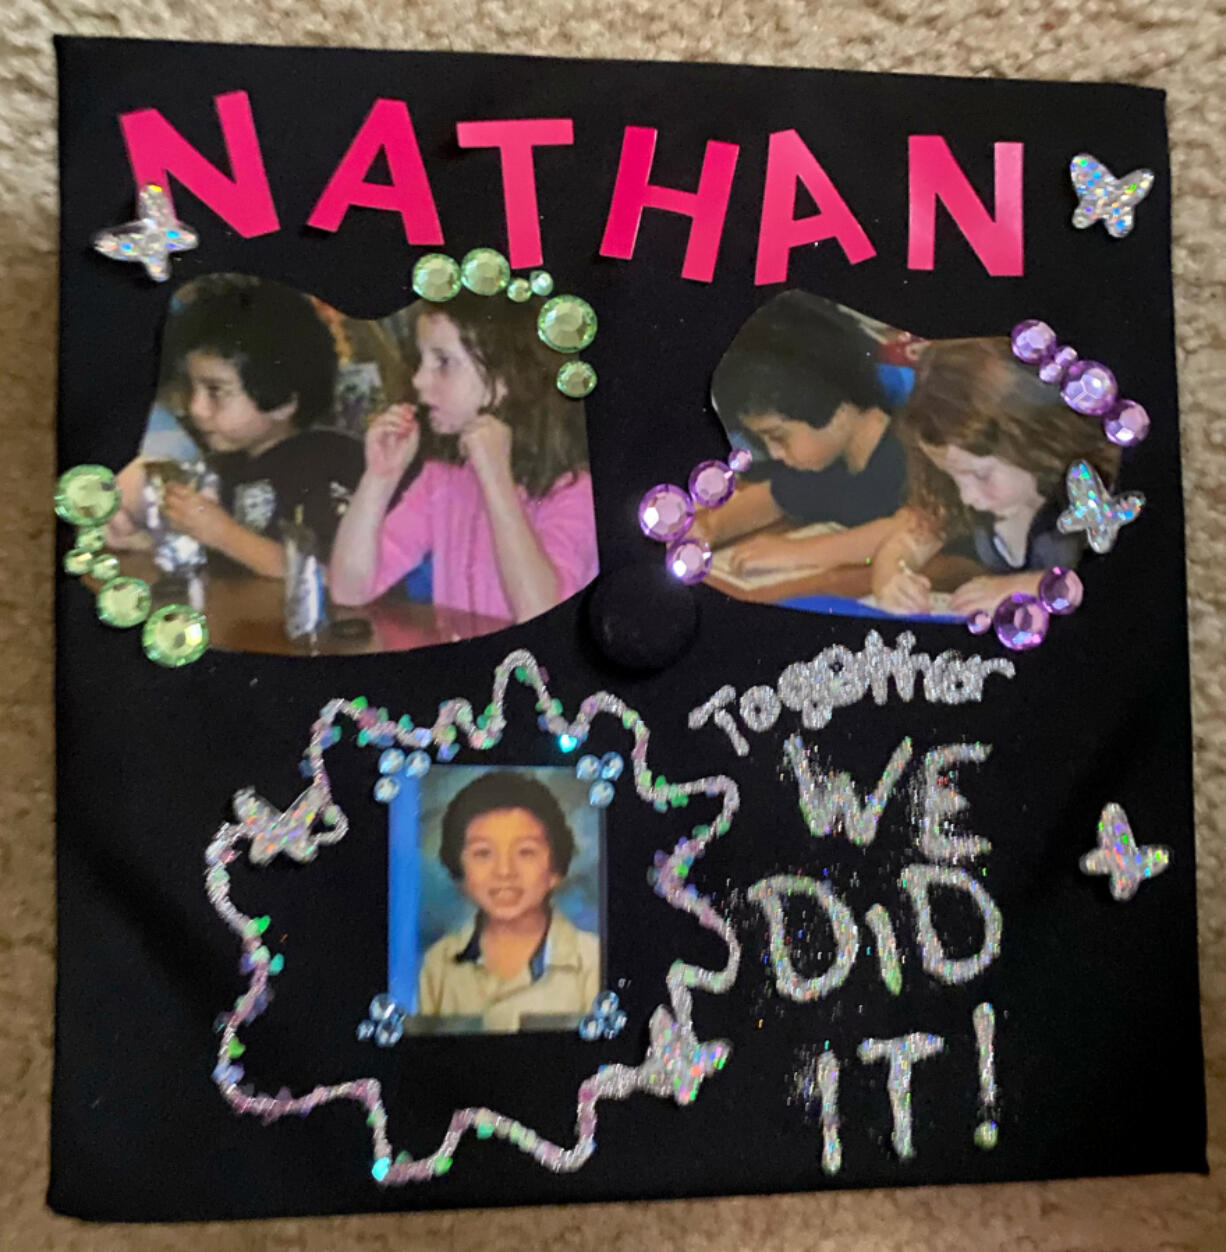 "Nathan: Together we did it!" reads a message on Mackenzie McVicker's graduation cap, an honor to her best friend, Nathan Dao, who was killed along with four siblings in a 2011 house fire set by his father, Tuan Dao. Alongside the message are photos of Nathan Dao and McVicker from kindergarten, as well as Dao's official class photo.